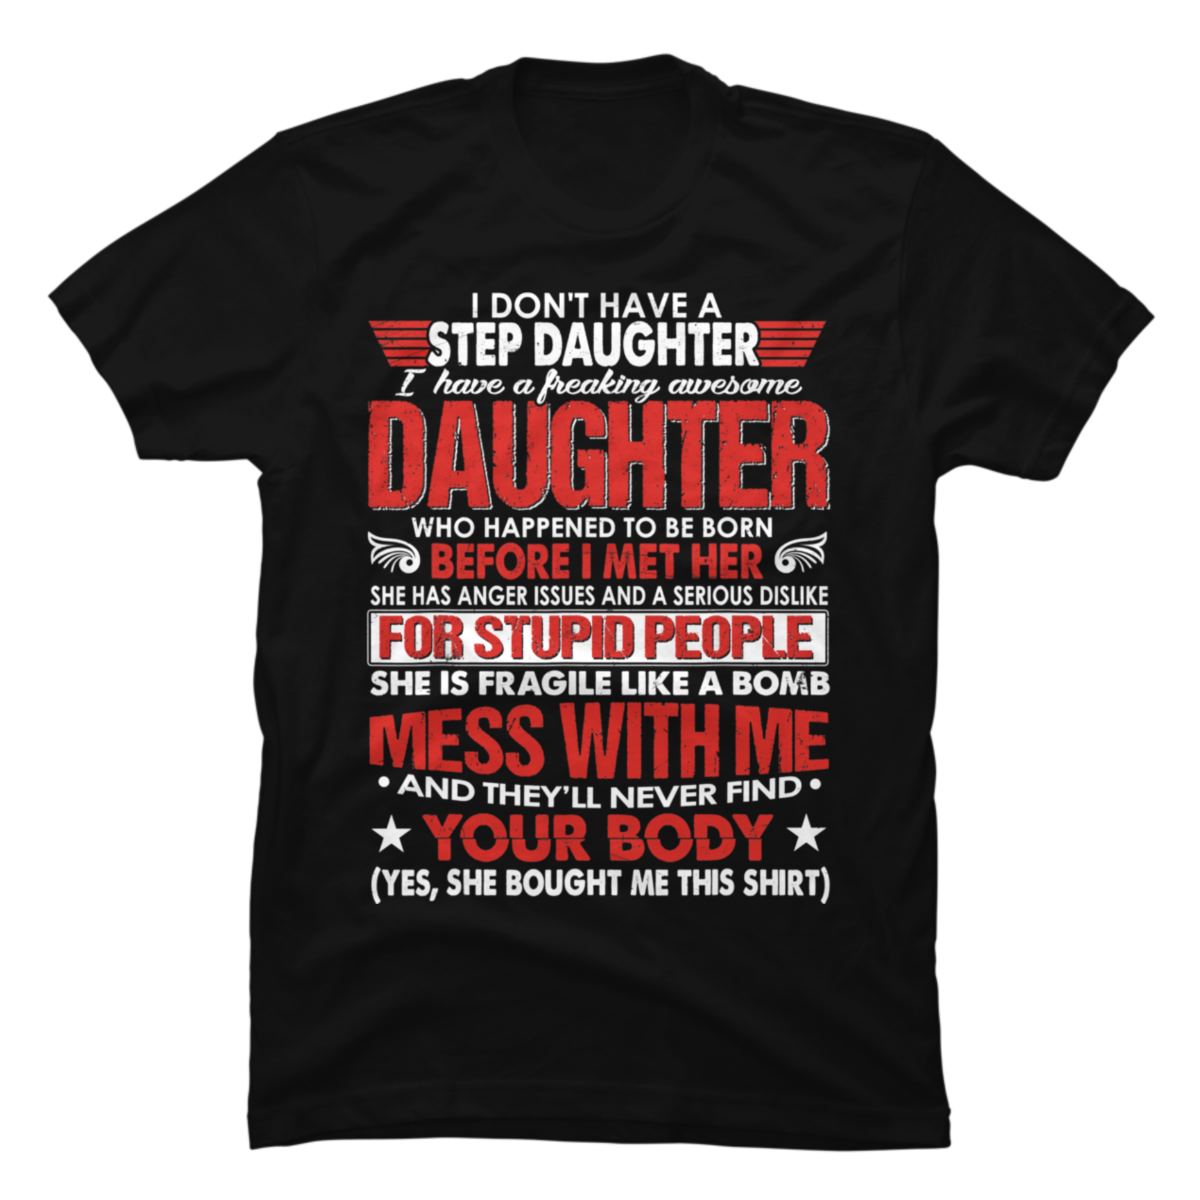 I Dont Have A Step Daughter I Have Awesome Daughter - Buy t-shirt designs